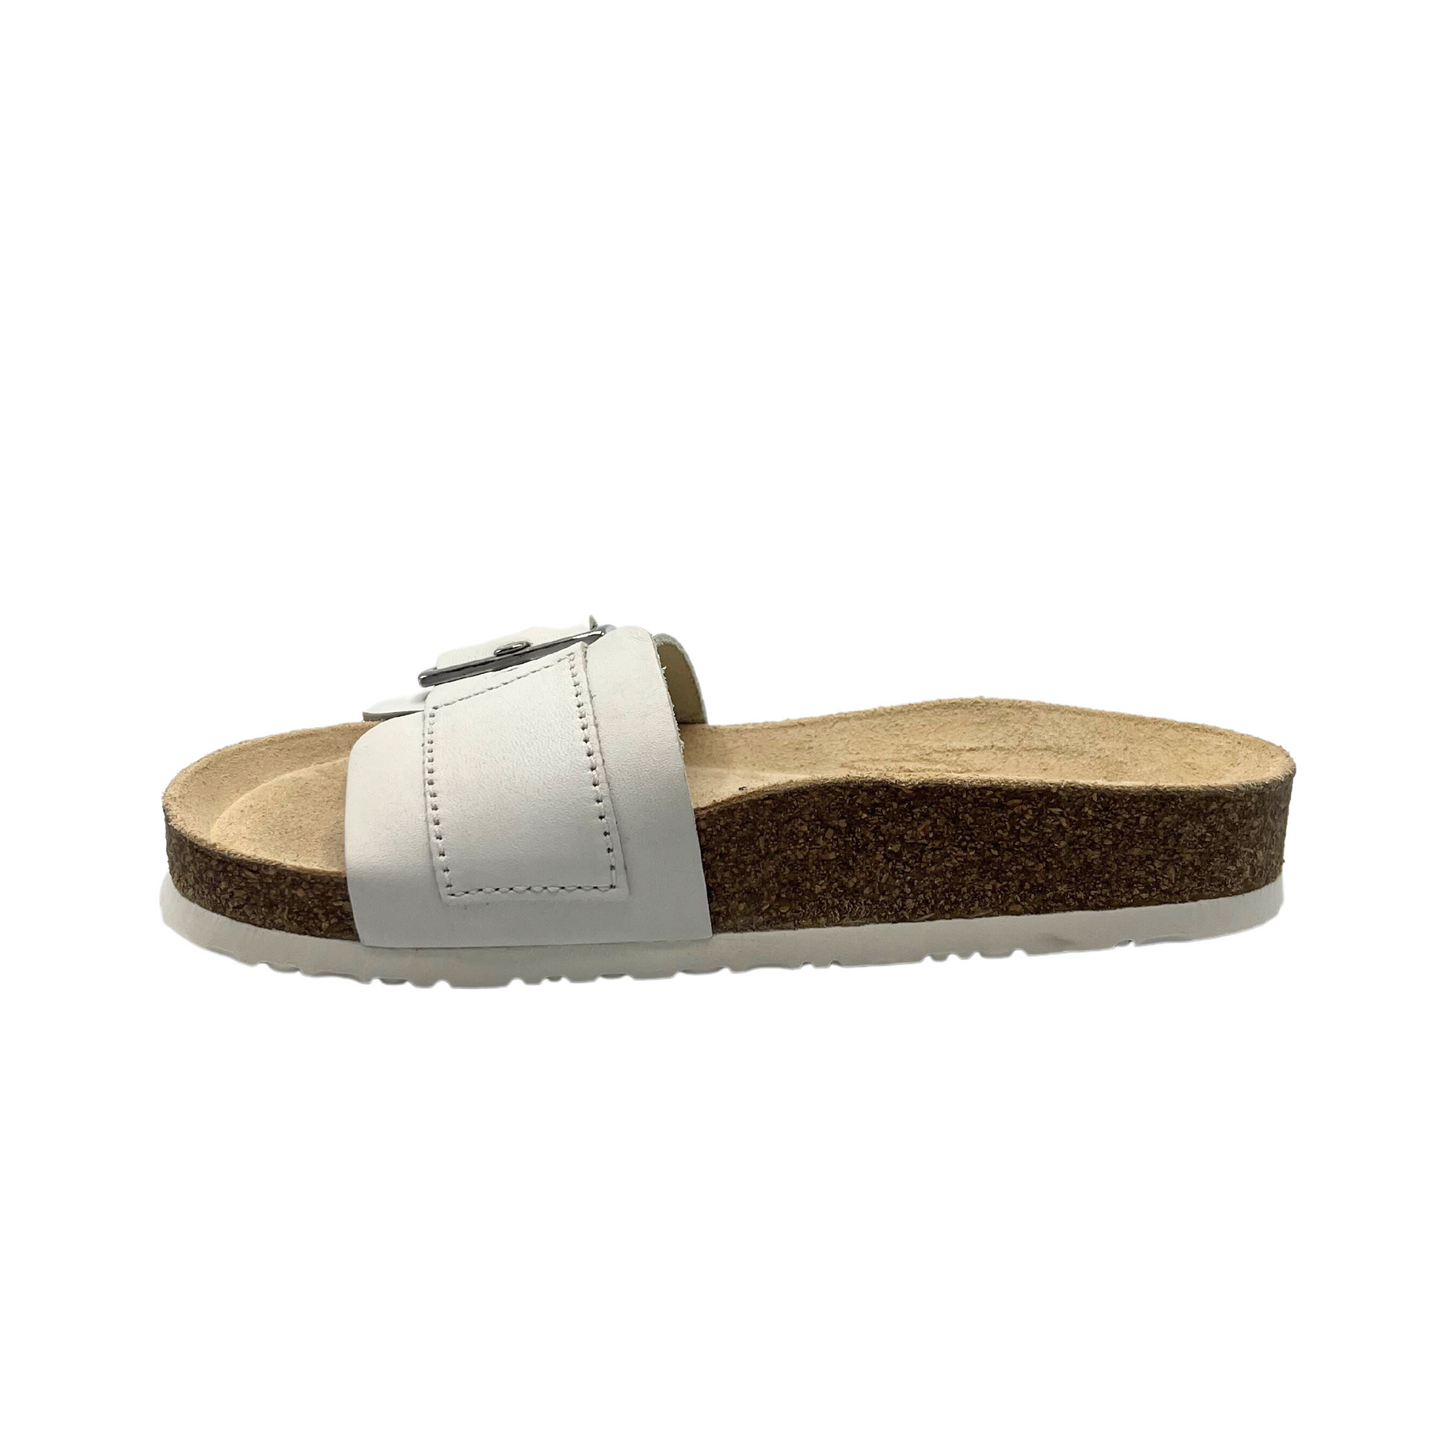 Inside view of a white leather walking sandal with open toe and heel.  Simple in design with one wide panel at forefoot.  This angle shows the great archs upport in the footbed